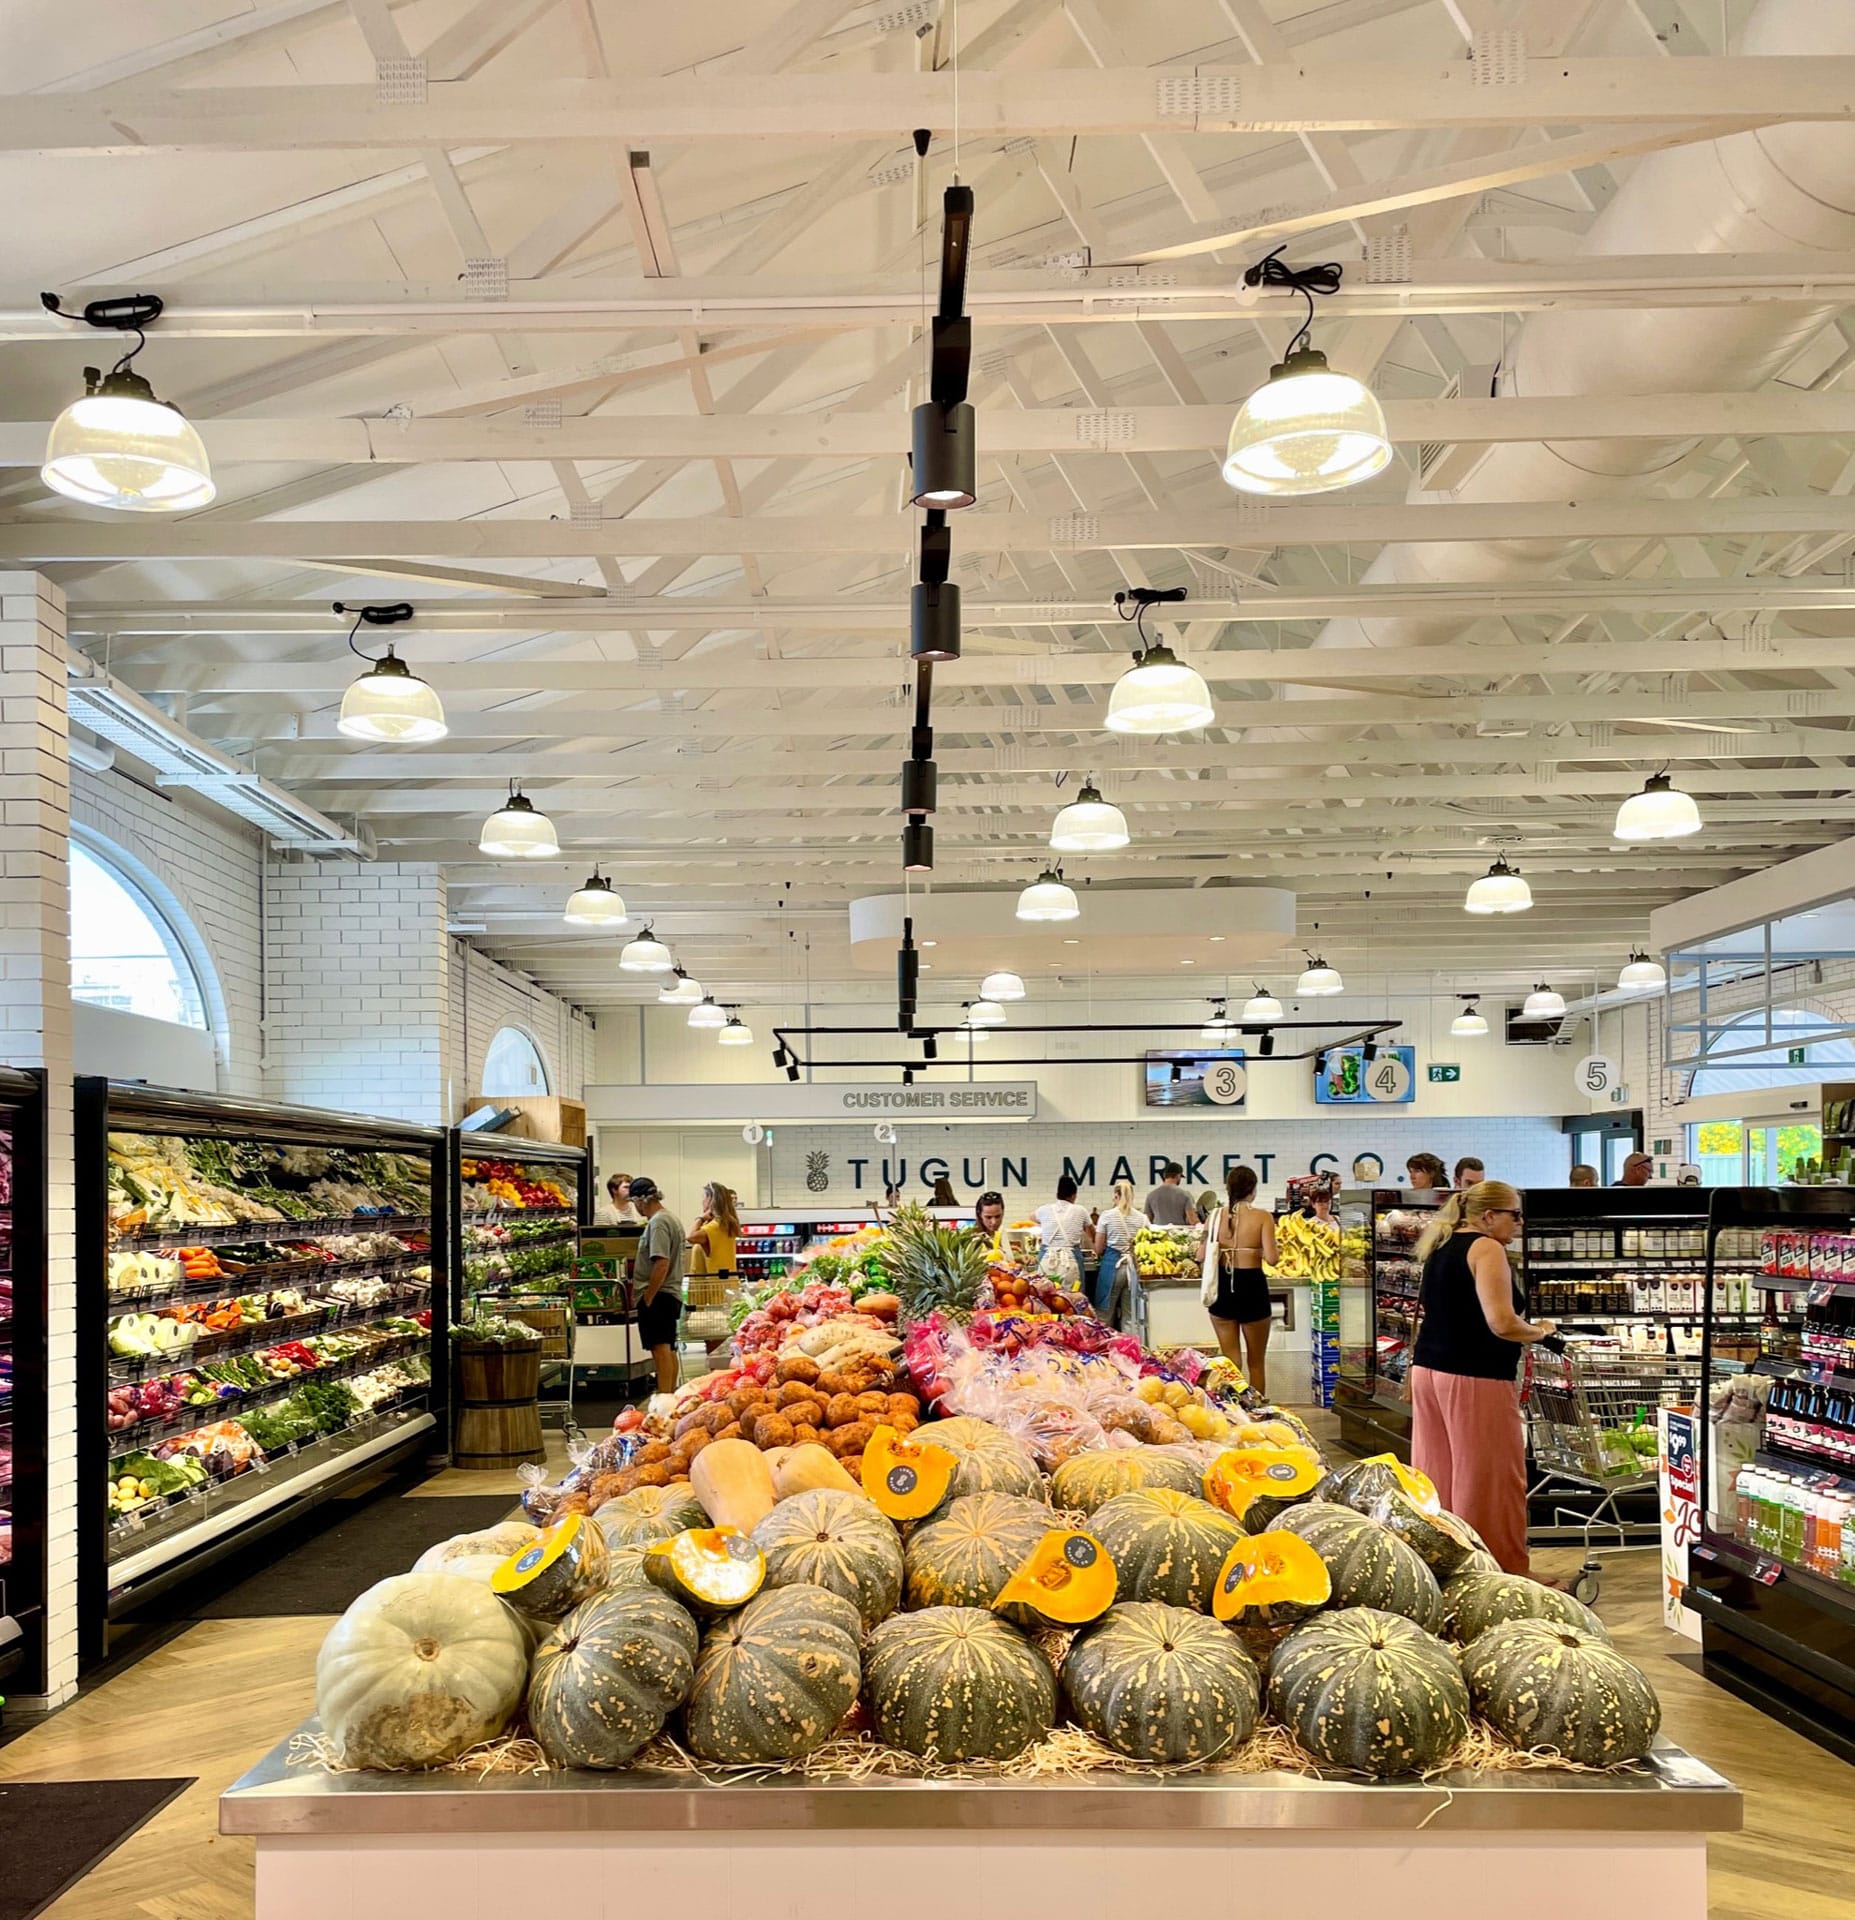 Tugun Market Co. by 77 Architecture. Photography by Brock Beazley. Interior of retail premise. Shelves of food arranged on right and left hand side of image. 